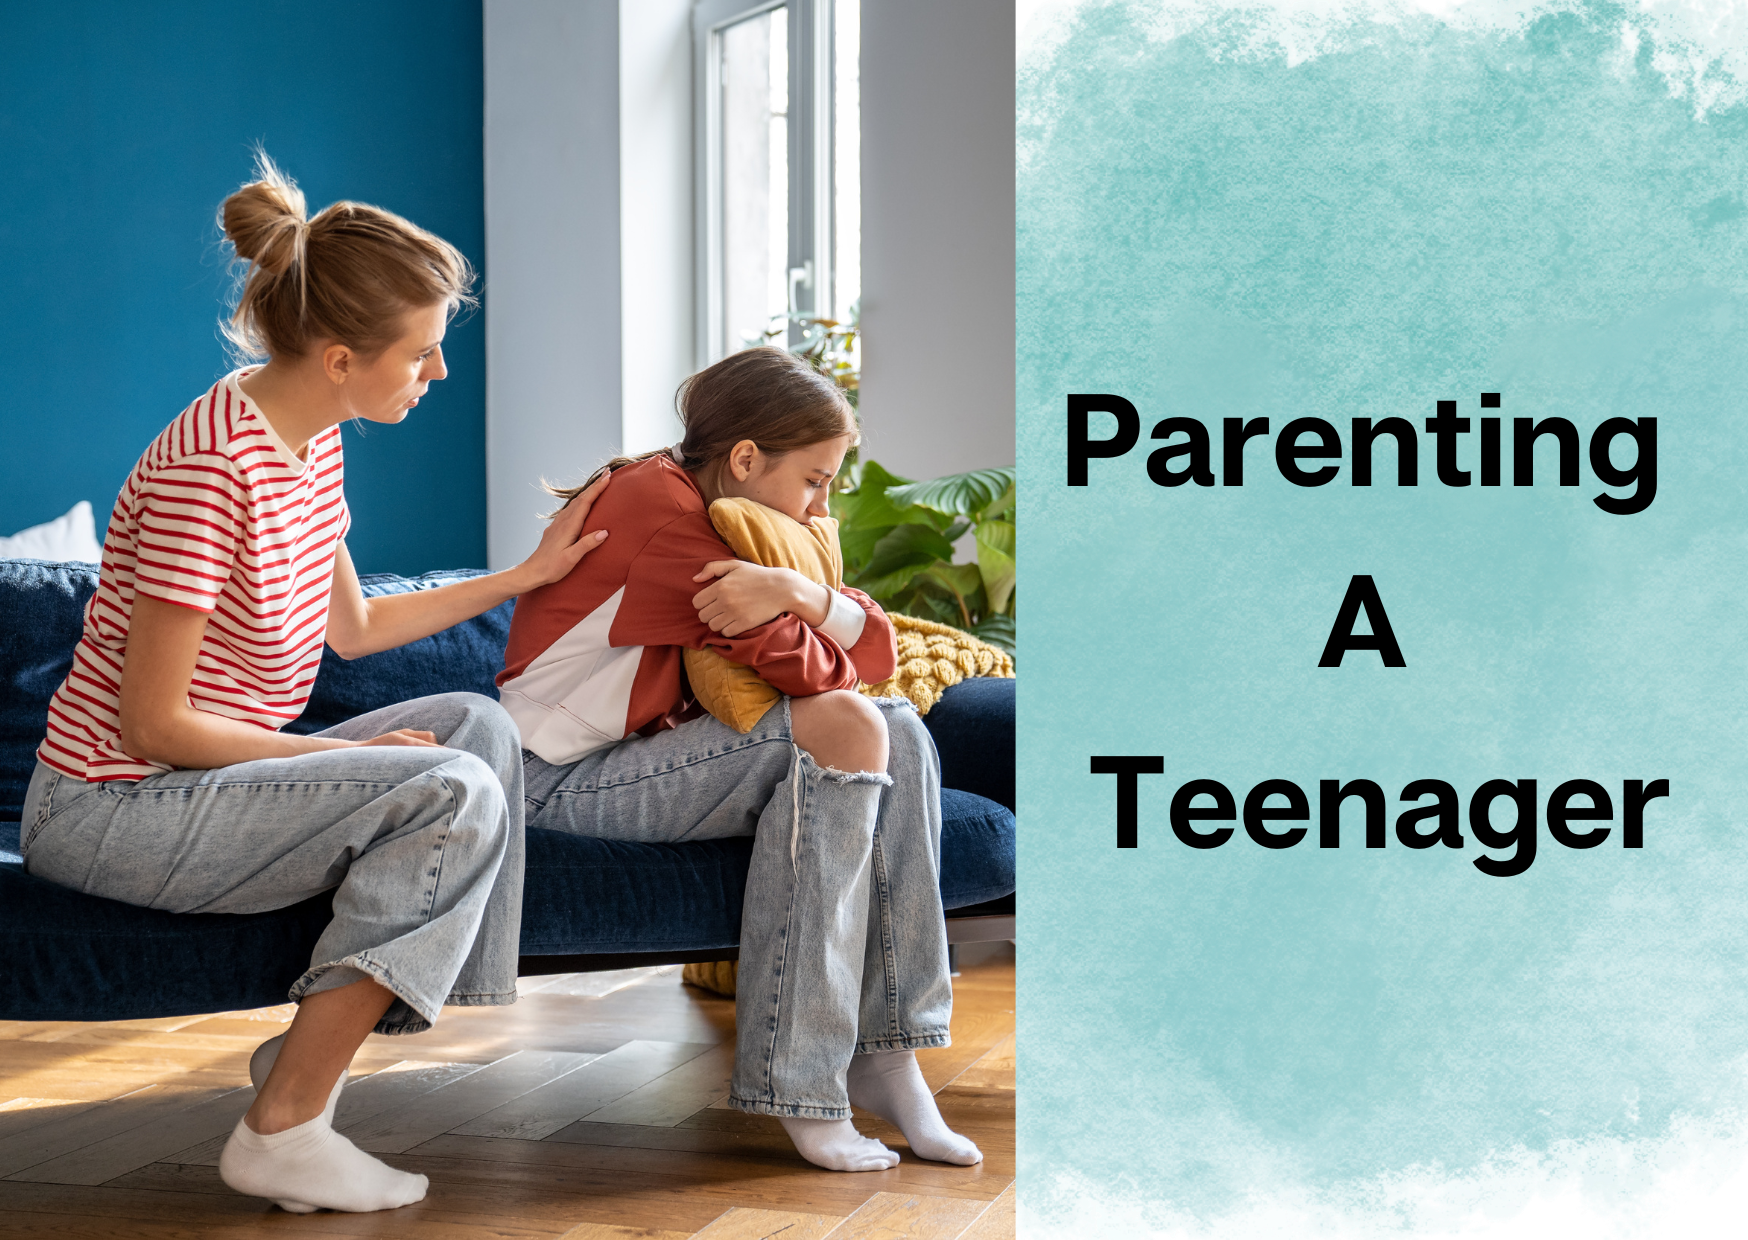 Parenting a Teenager